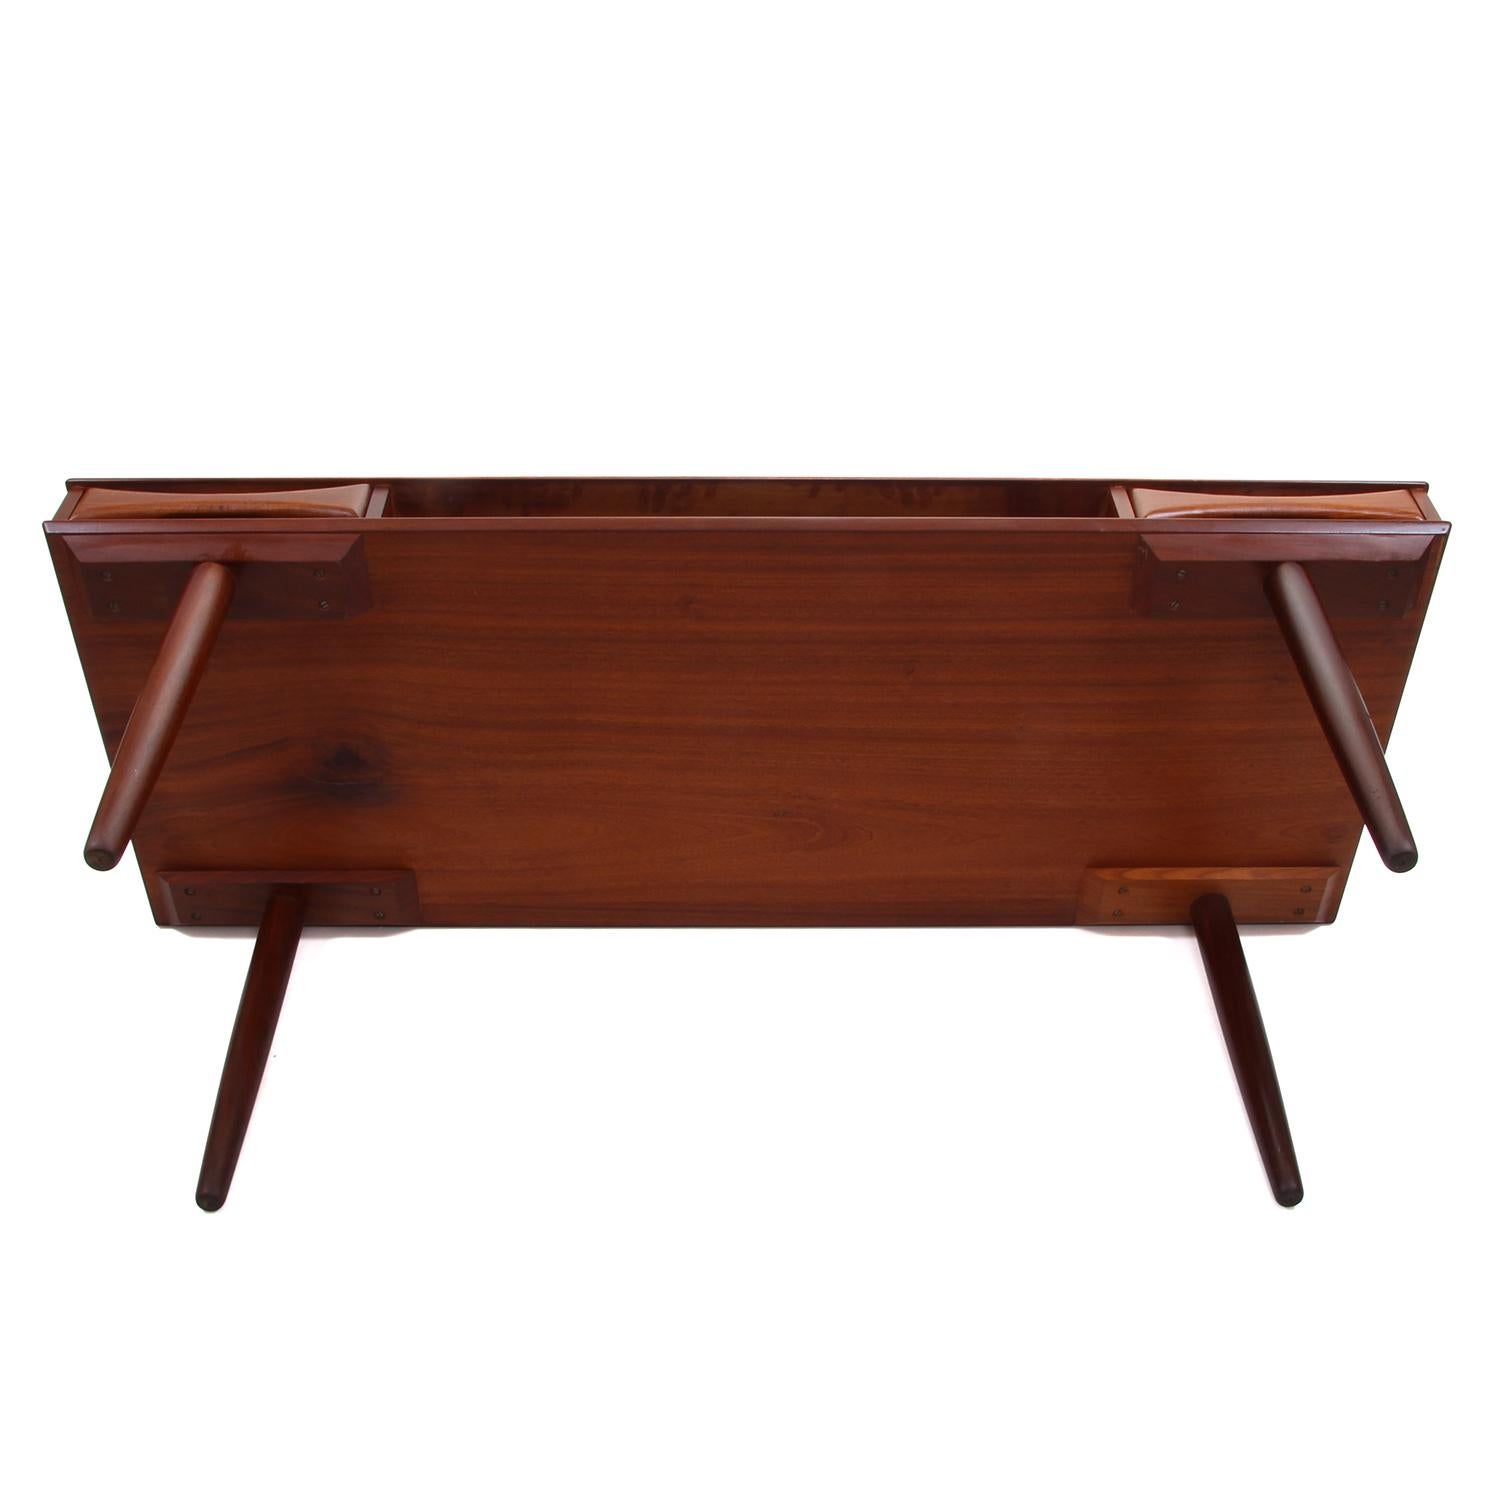 Teak Coffee Table by Danish Furniture Maker, 1960s, with Shelf and Two Drawers 3